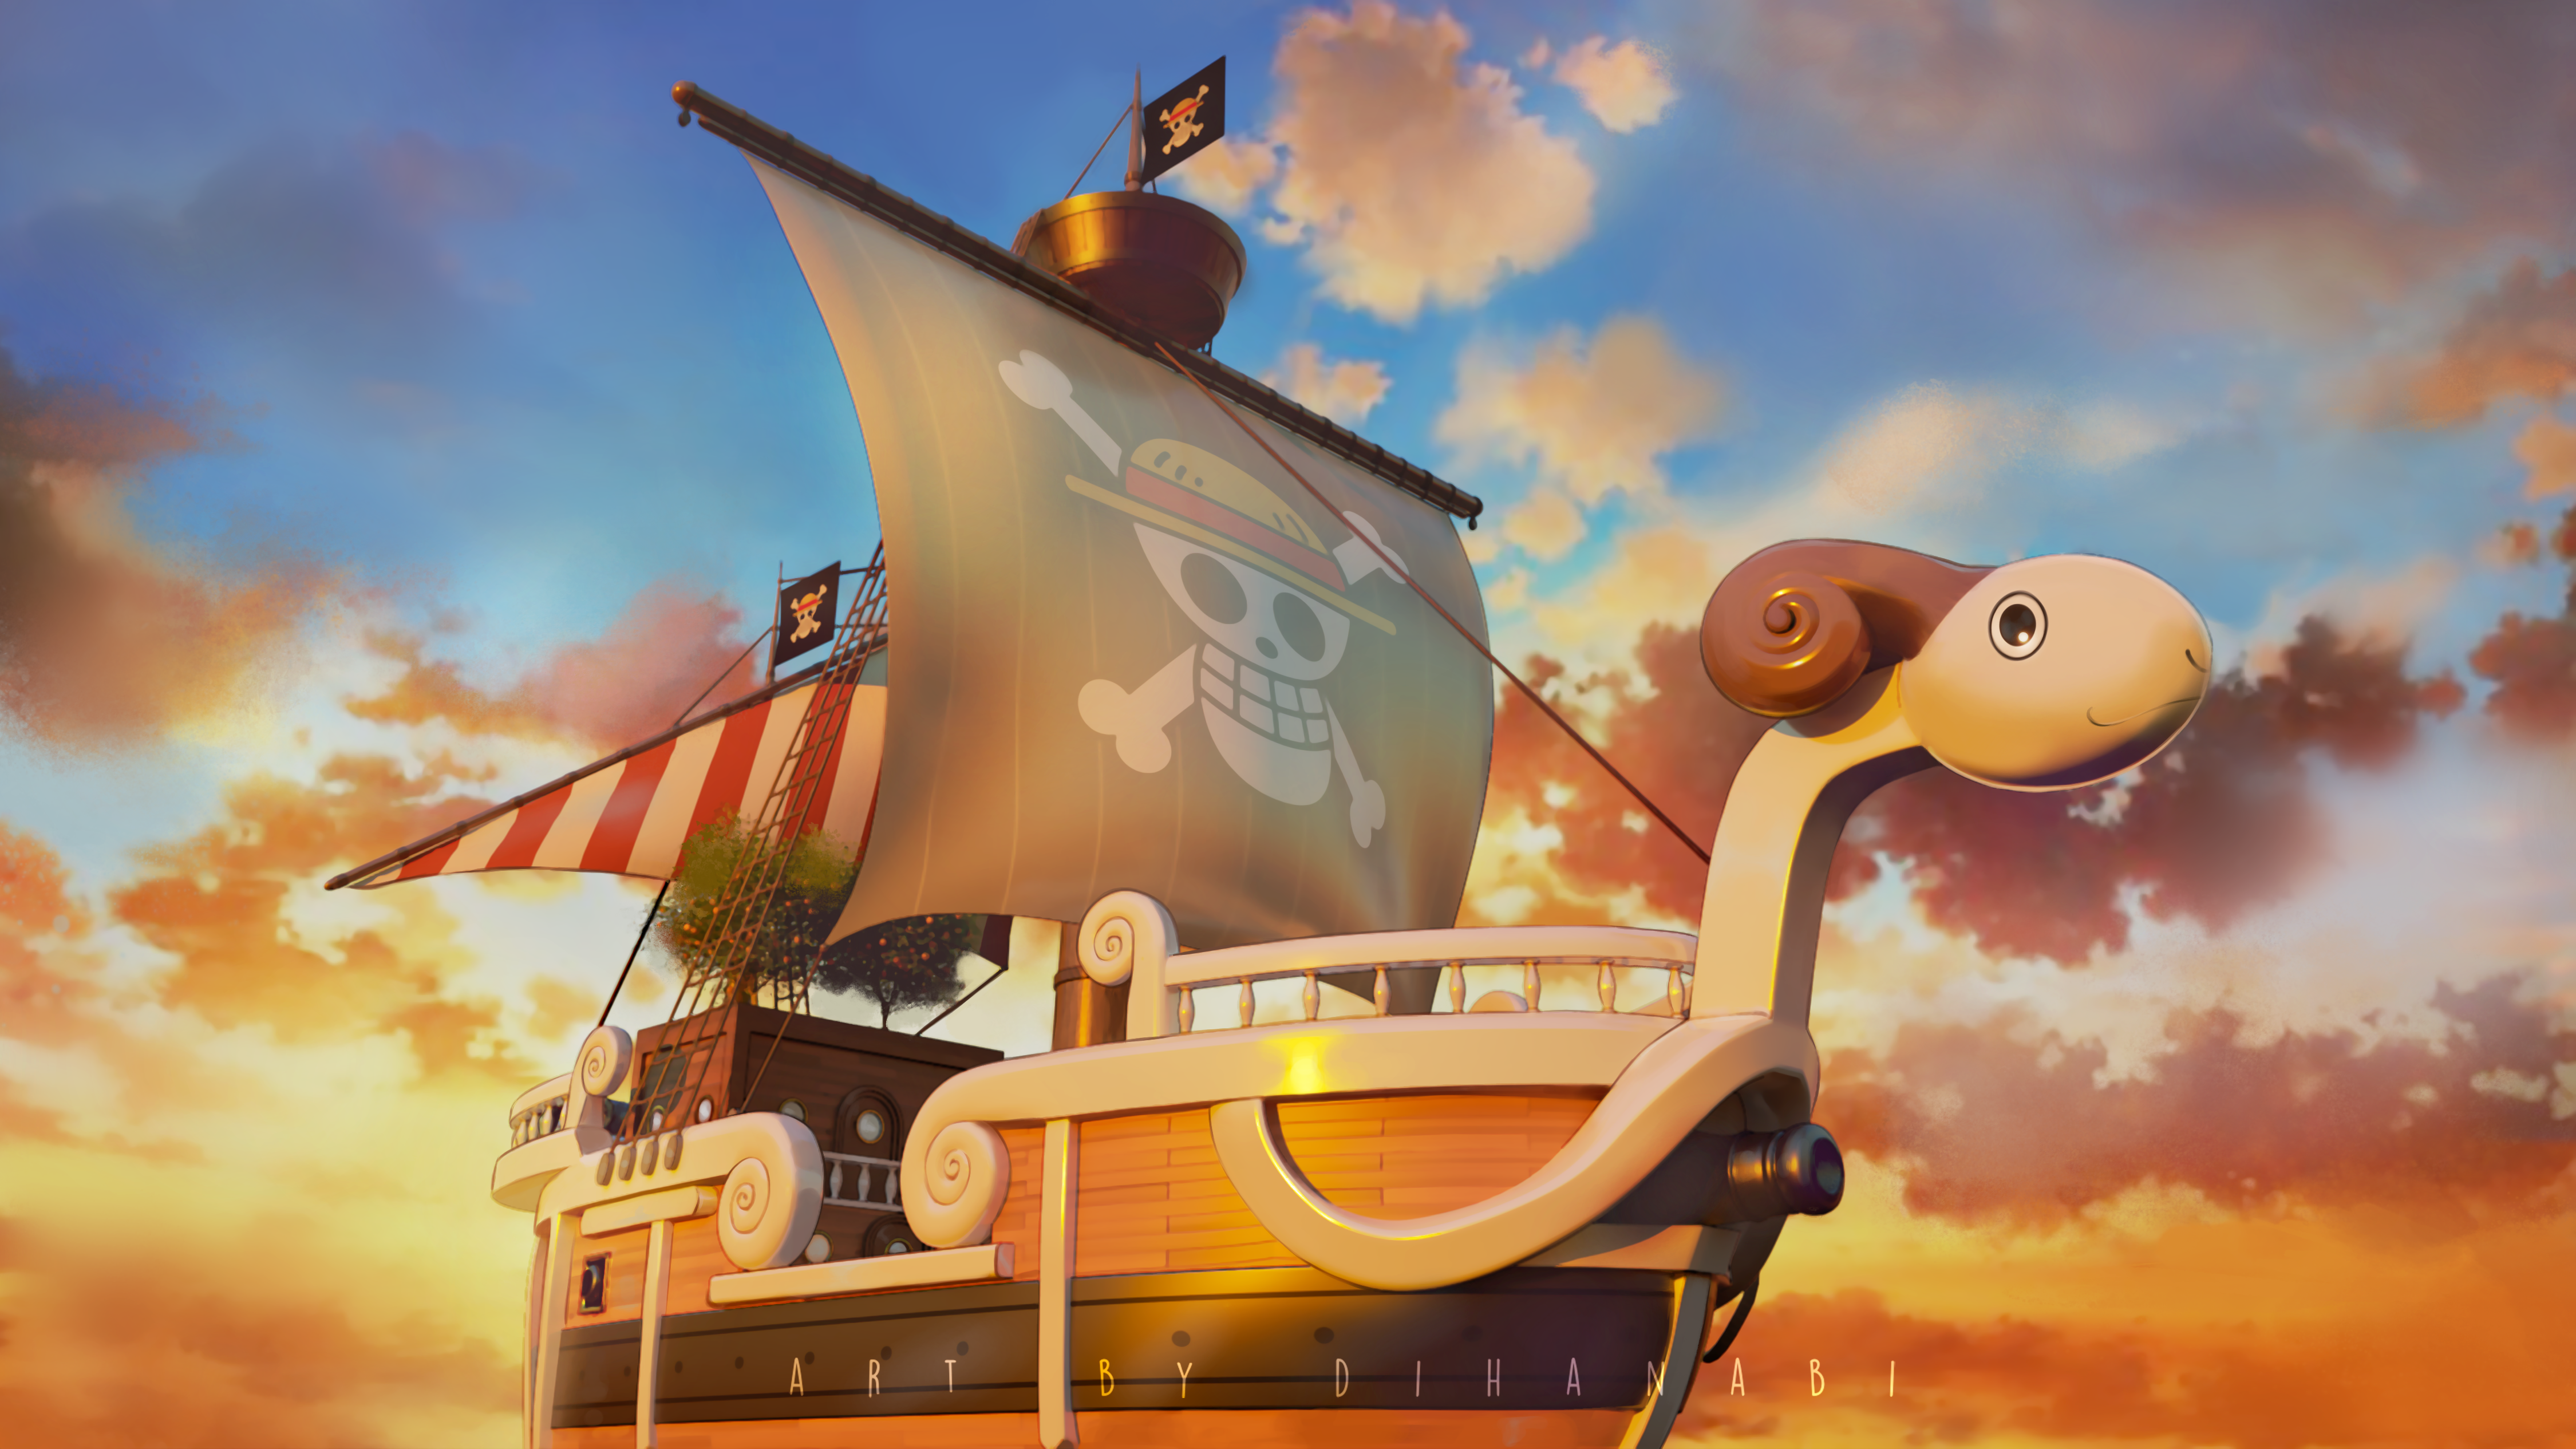 Going Merry (One Piece) - Desktop Wallpapers, Phone Wallpaper, PFP, Gifs,  and More!